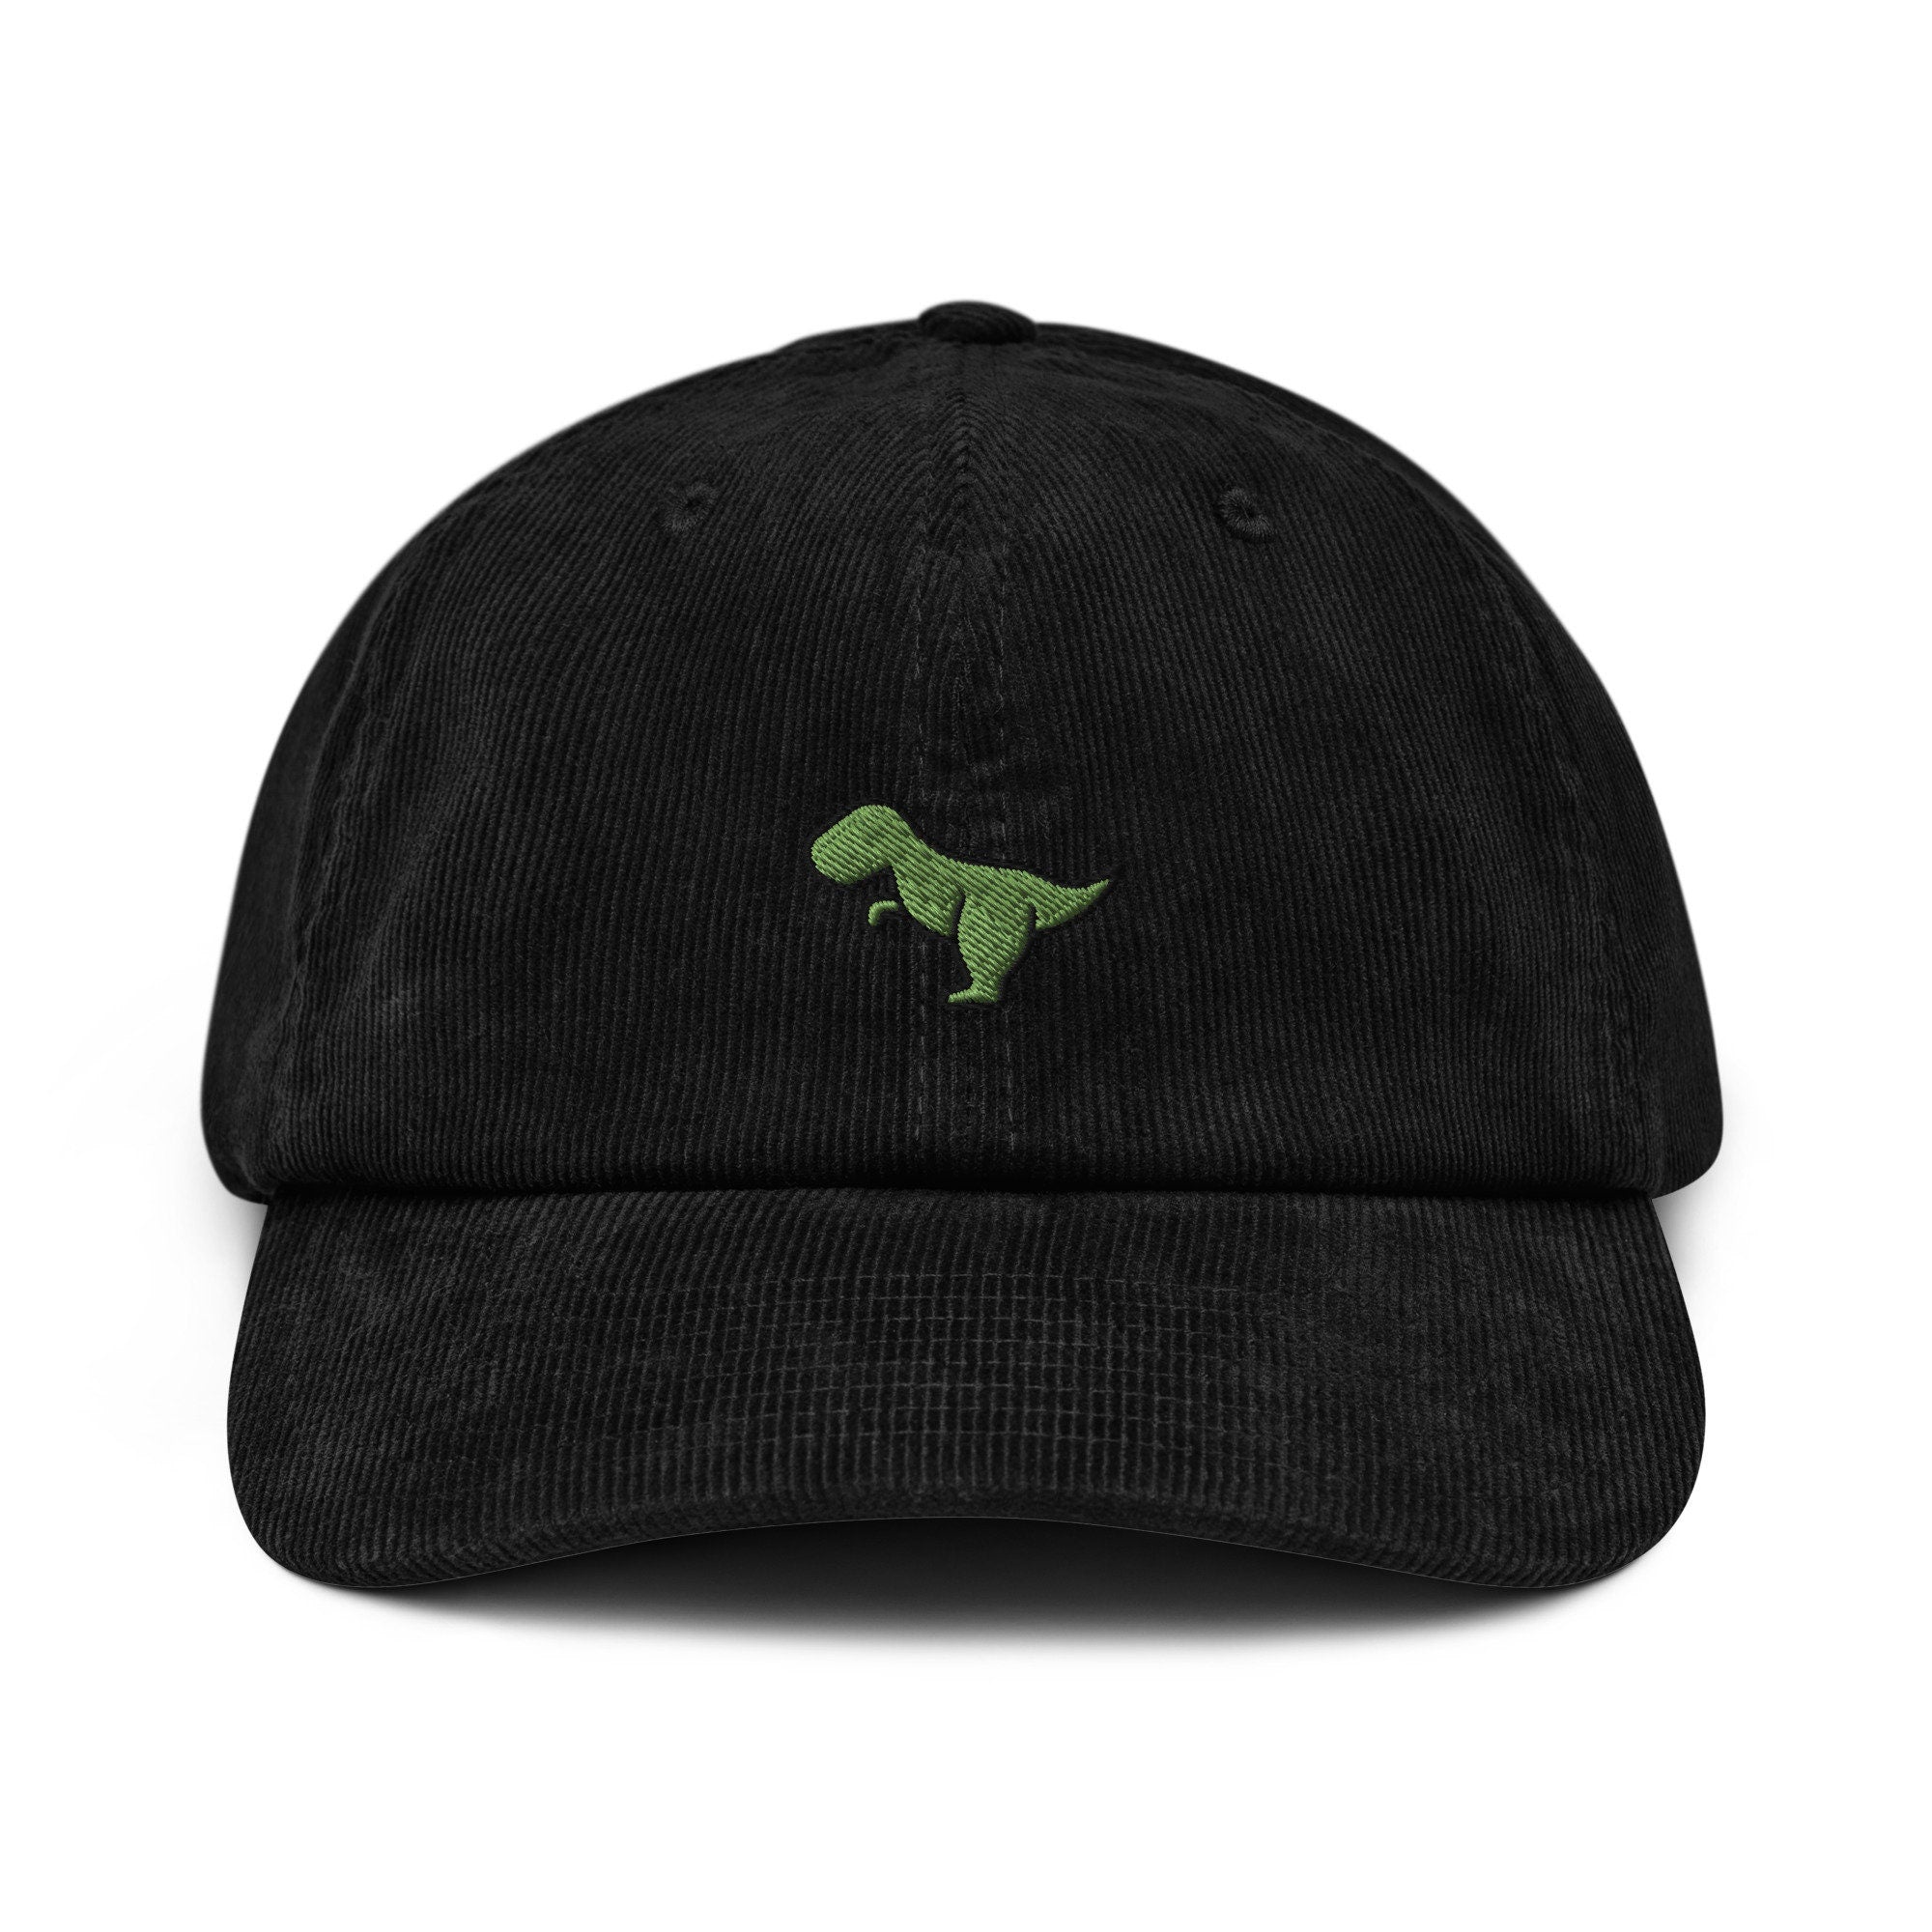 T-Rex Corduroy Hat, Handmade Embroidered Corduroy Dad Cap - Multiple Colors